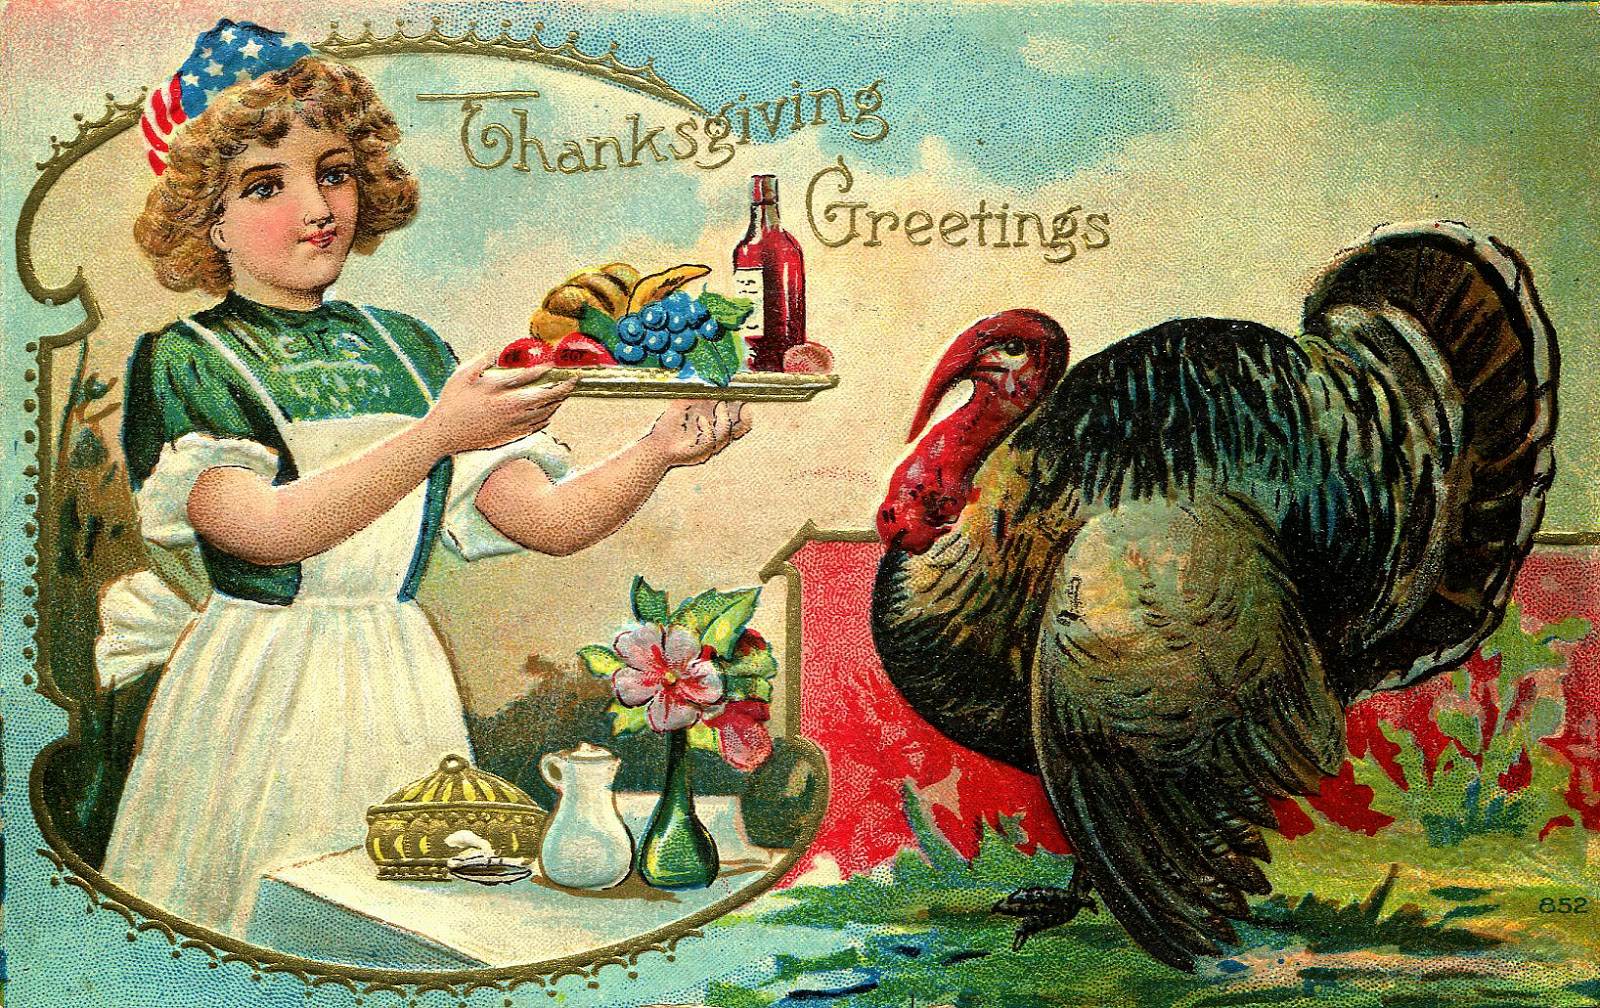 Angels and Dragonflies Crafts and Images: Thanksgiving Greetings